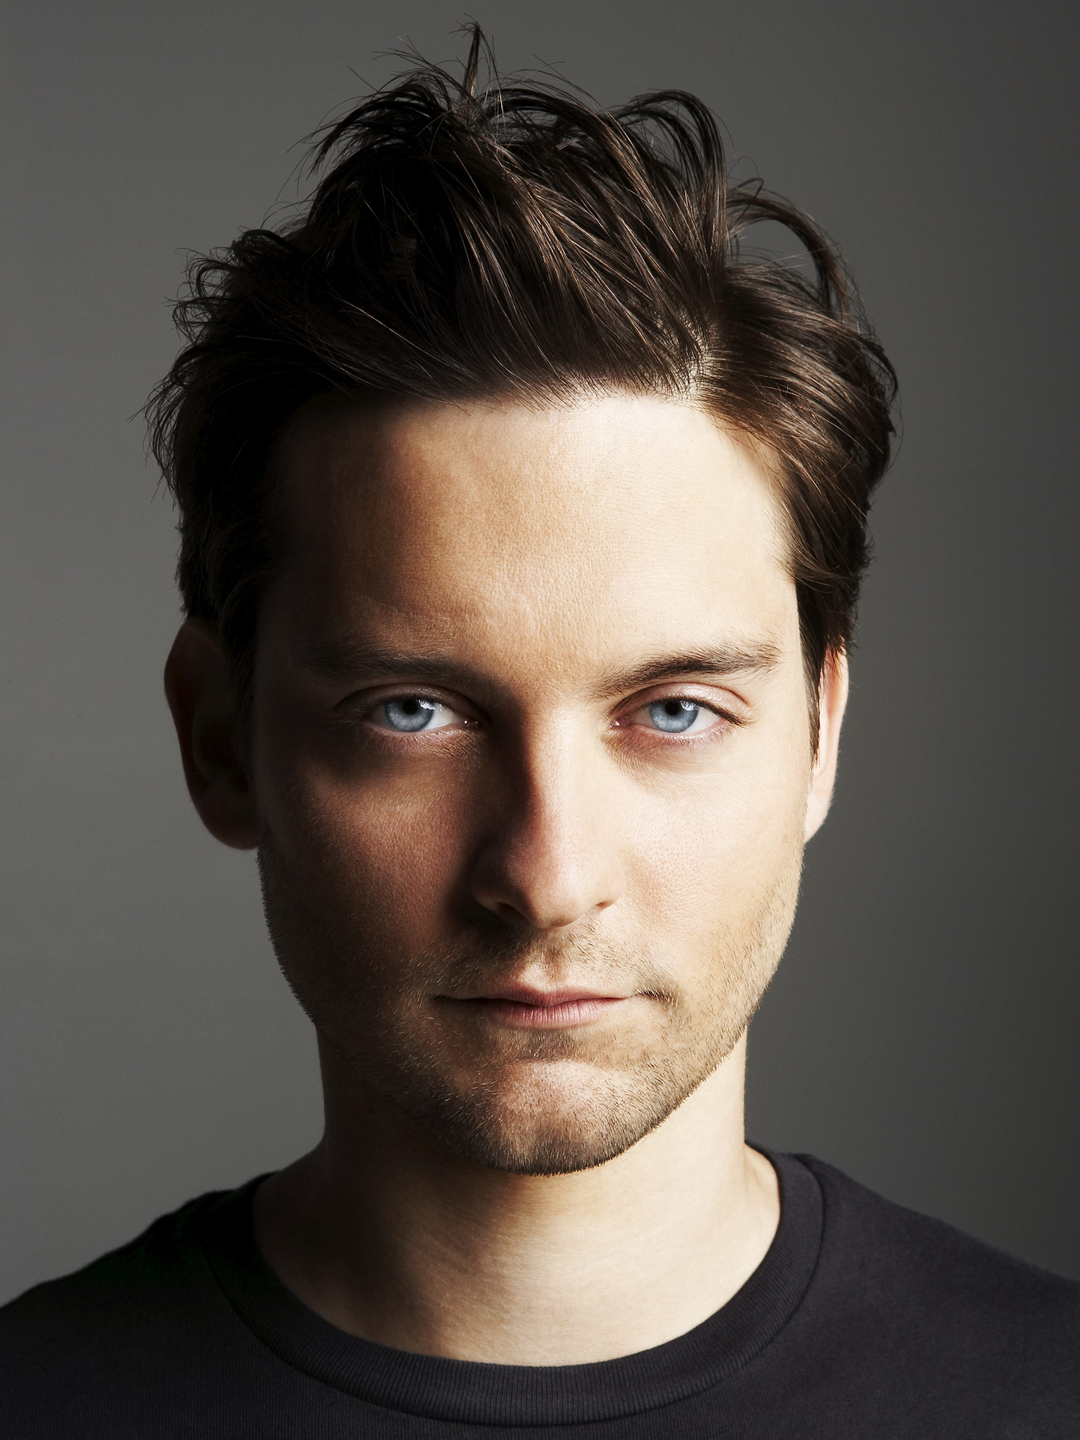 Tobey Maguire current look